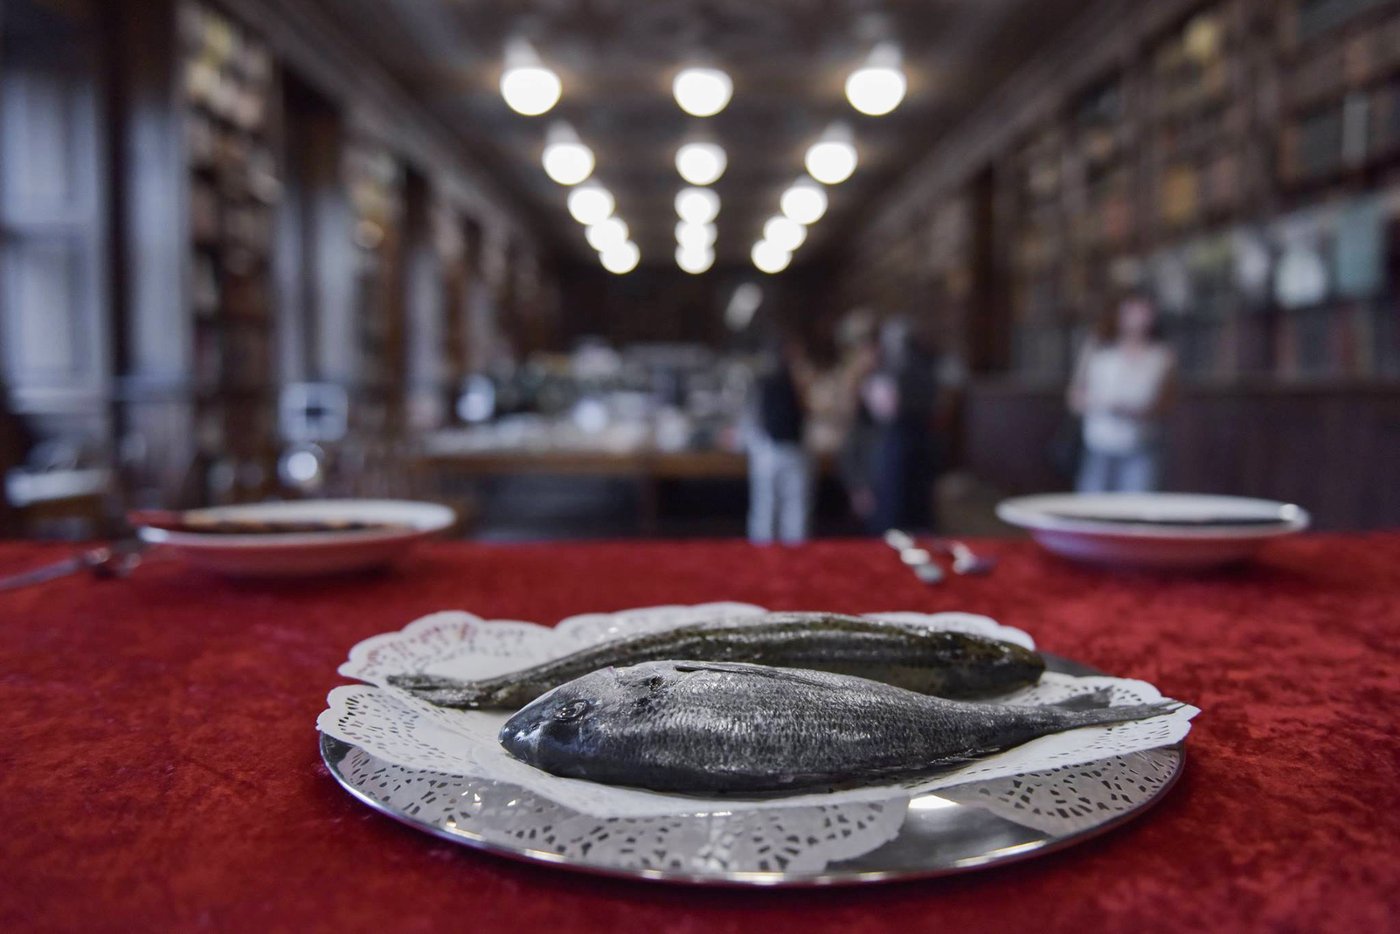 Exhibition view of two dead fish on a silver tray photographed on red fabric.